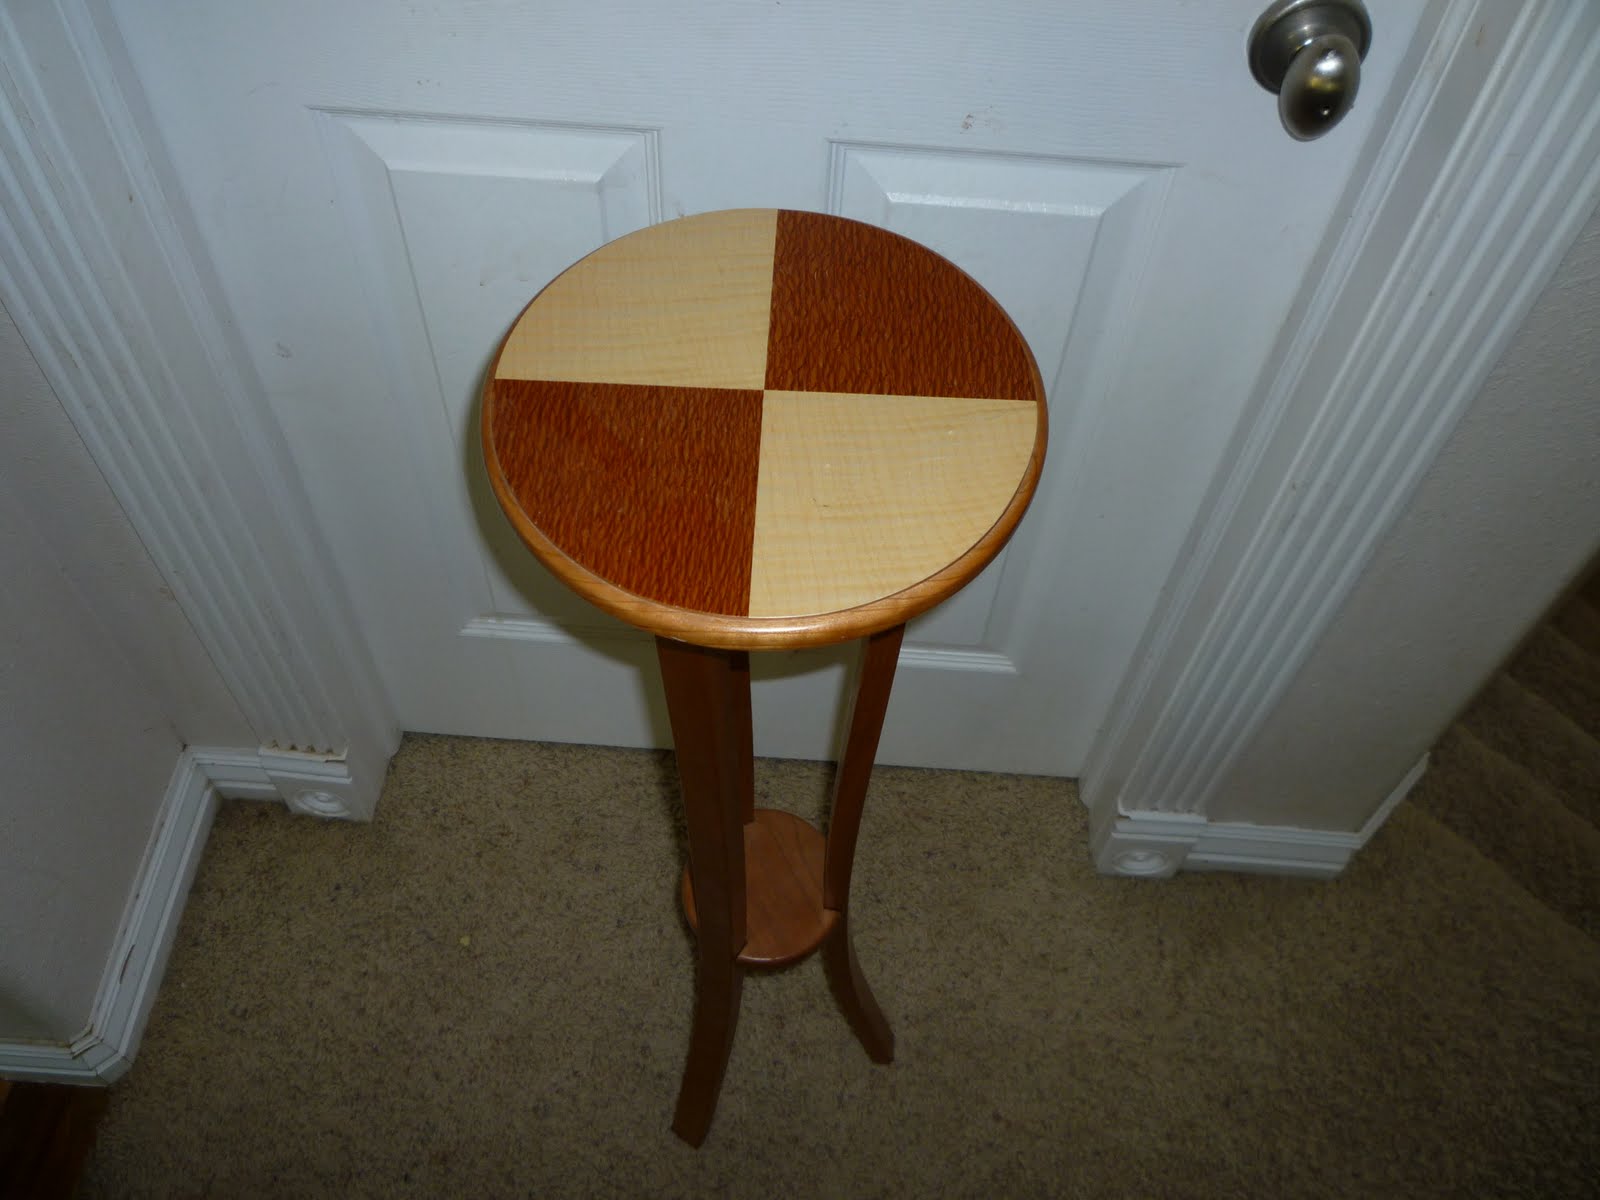 woodworking project ideas for a highschooler